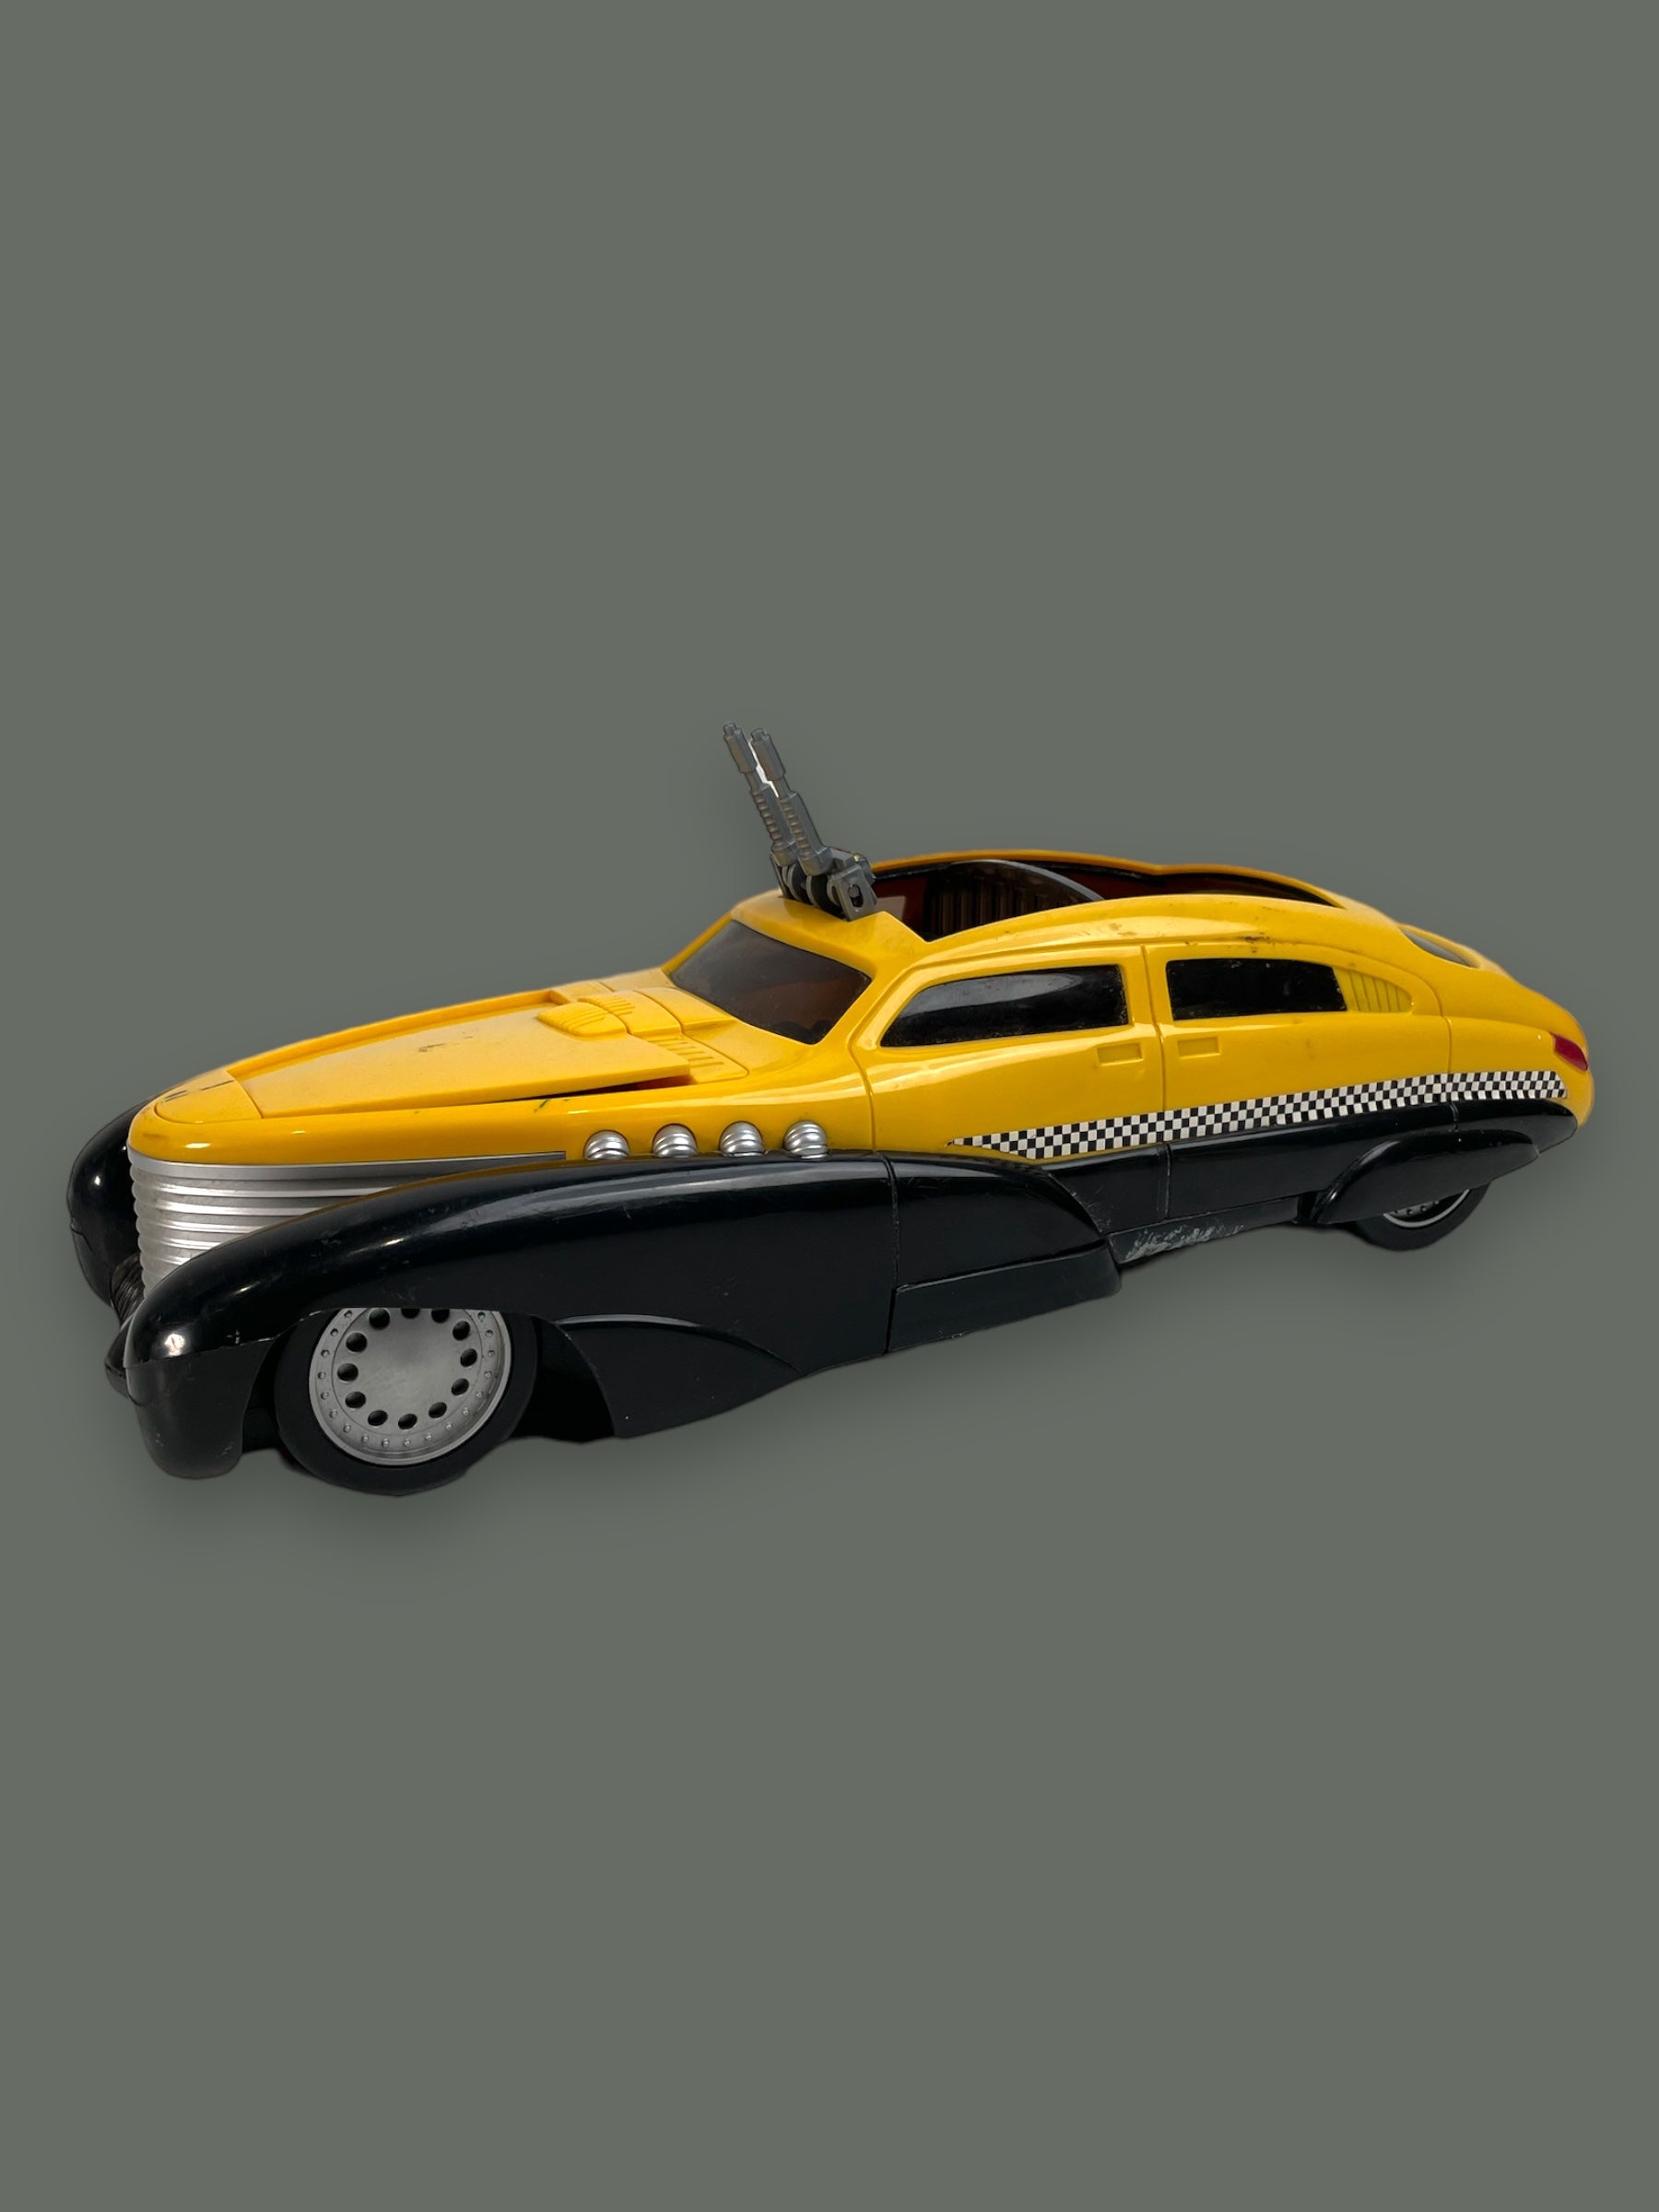 The Shadow Thunder Cab Taxi Action Figure Vehicle